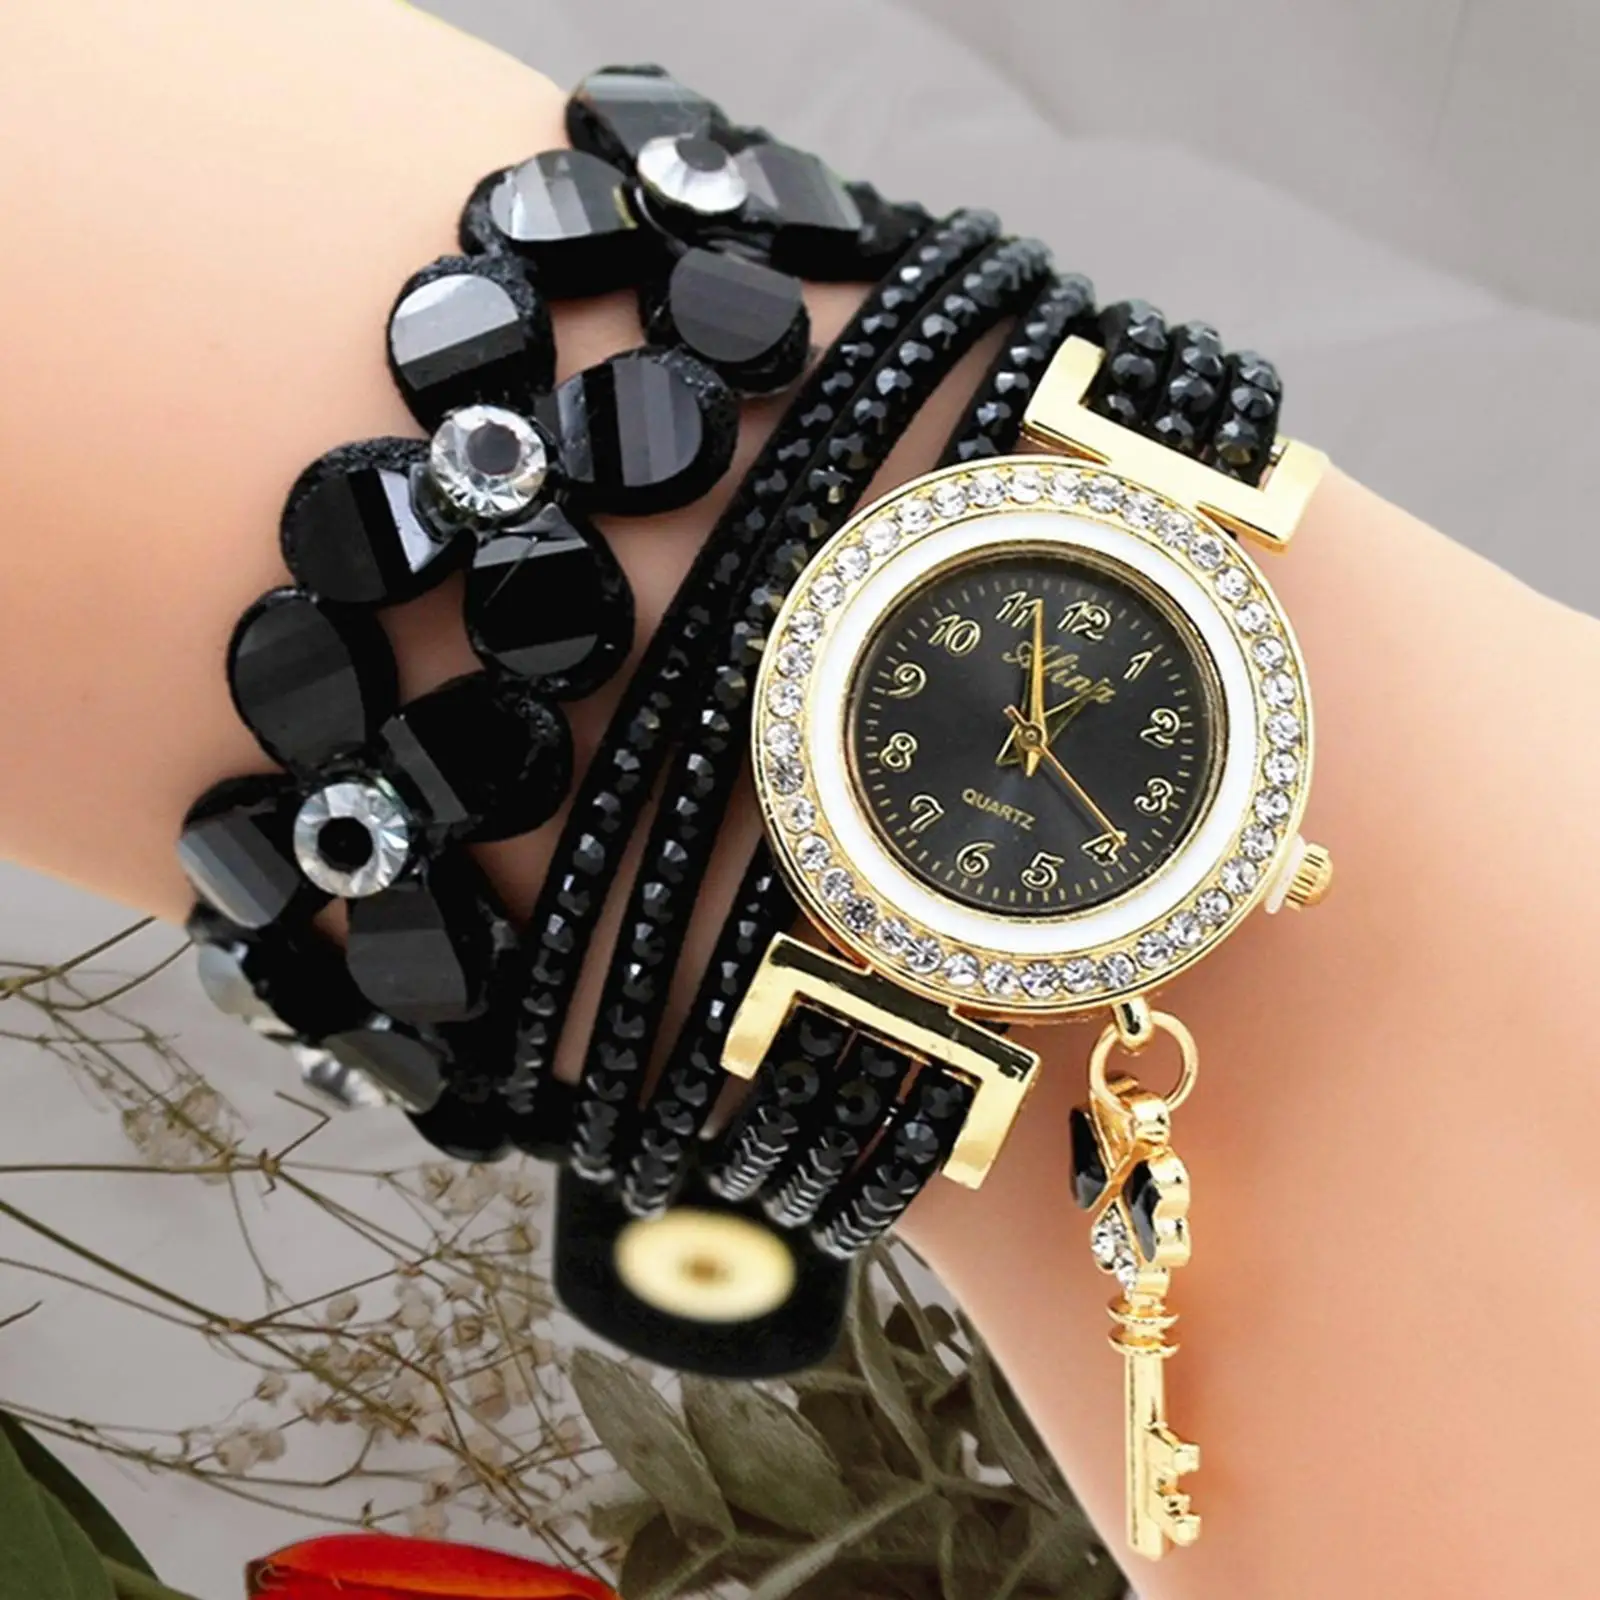 Bracelet Watch Durable Portable Time Display Decorative Wristwatch for Travel Birthday Gift Fishing Shopping Outdoor Activities